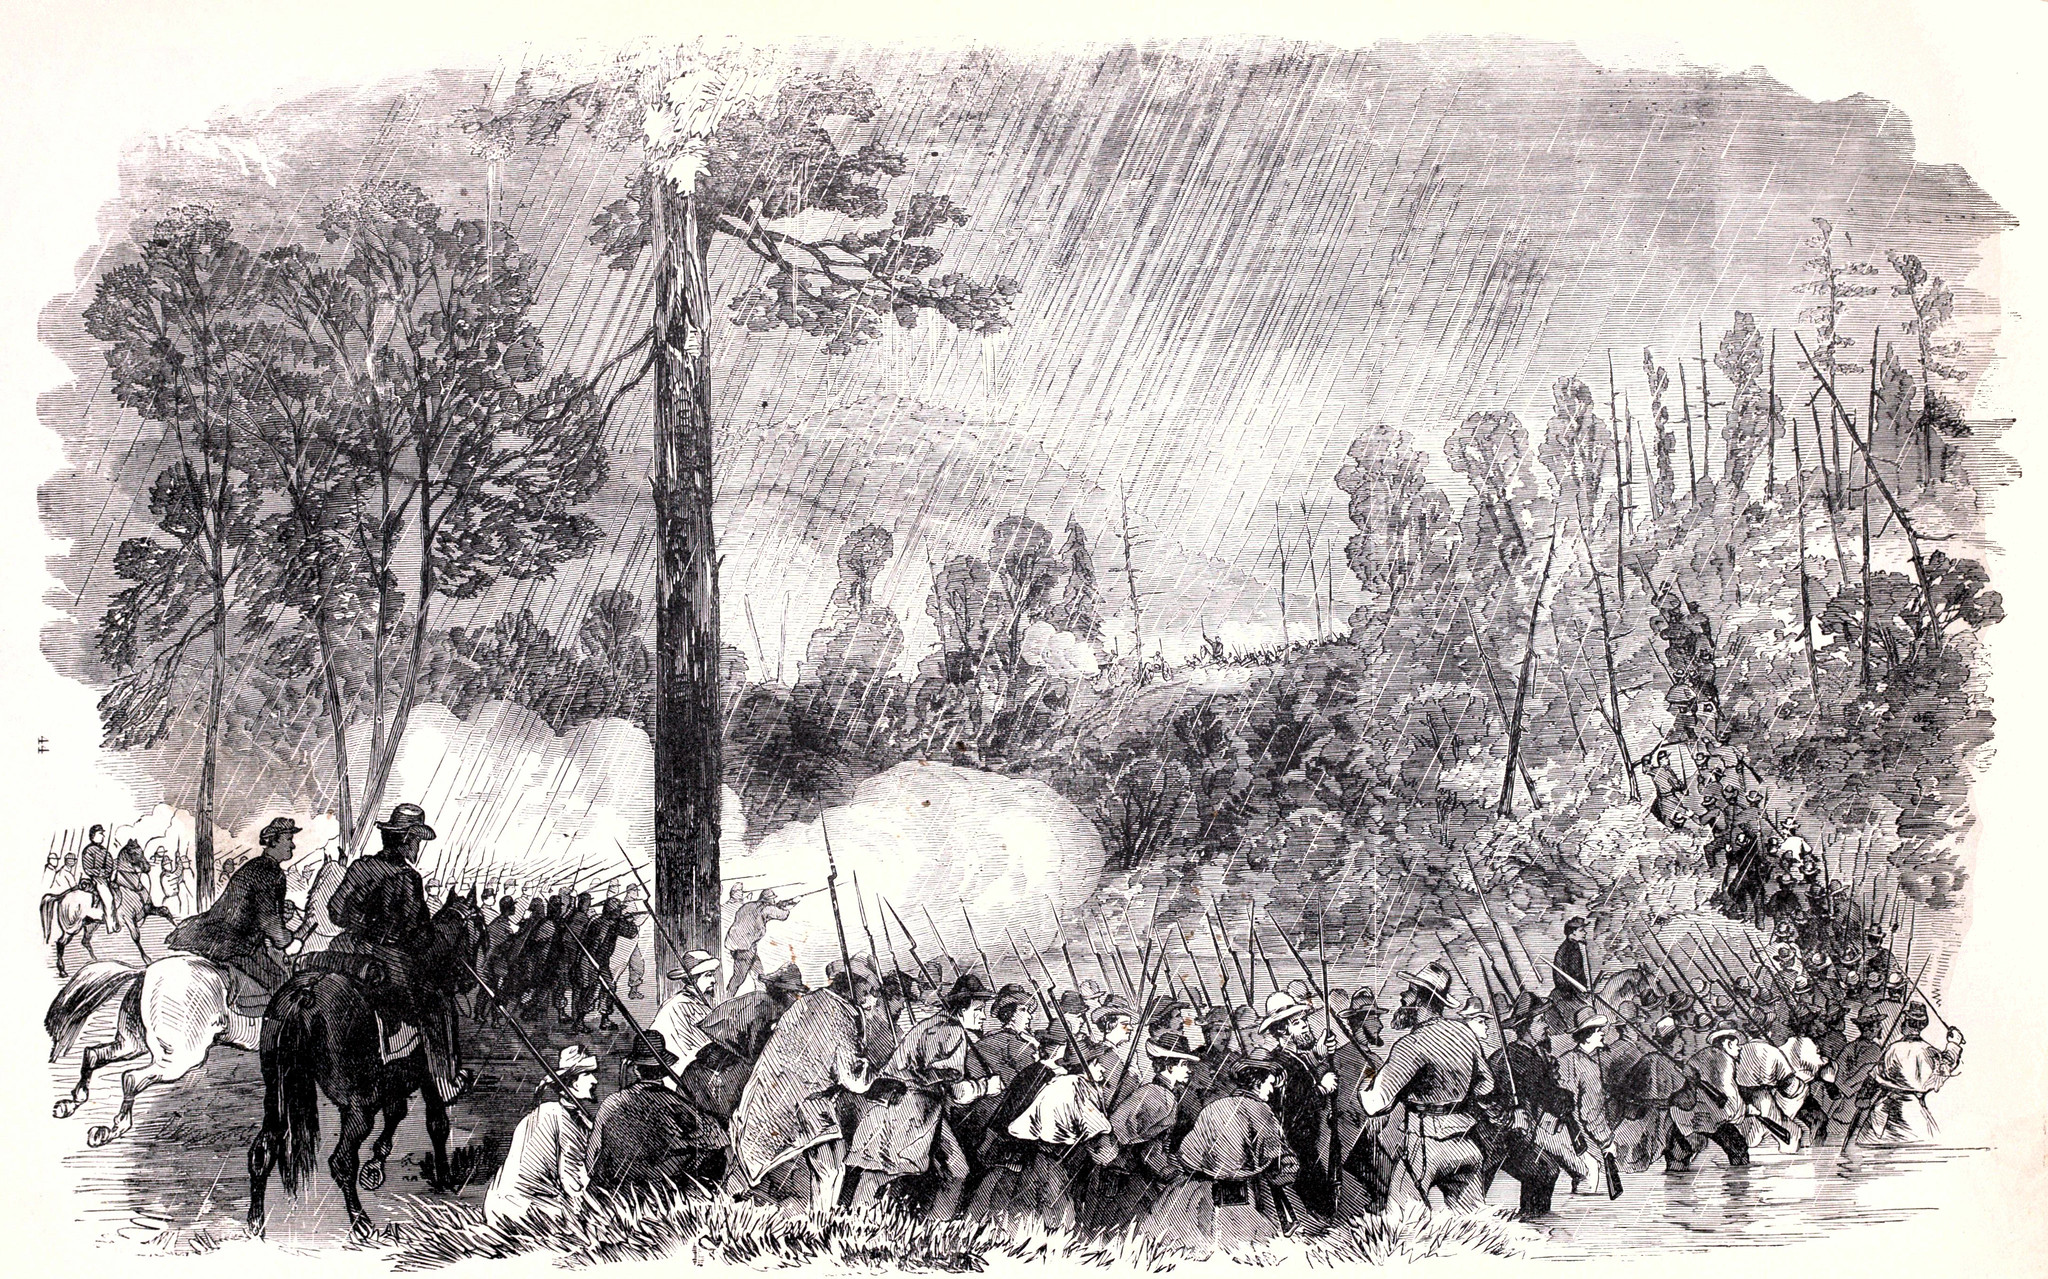 Battle Of Corrick's Ford, between the Troops of General McClellan's Command, under General Morris, and the Confederates under General Garnett, July 13th, 1861